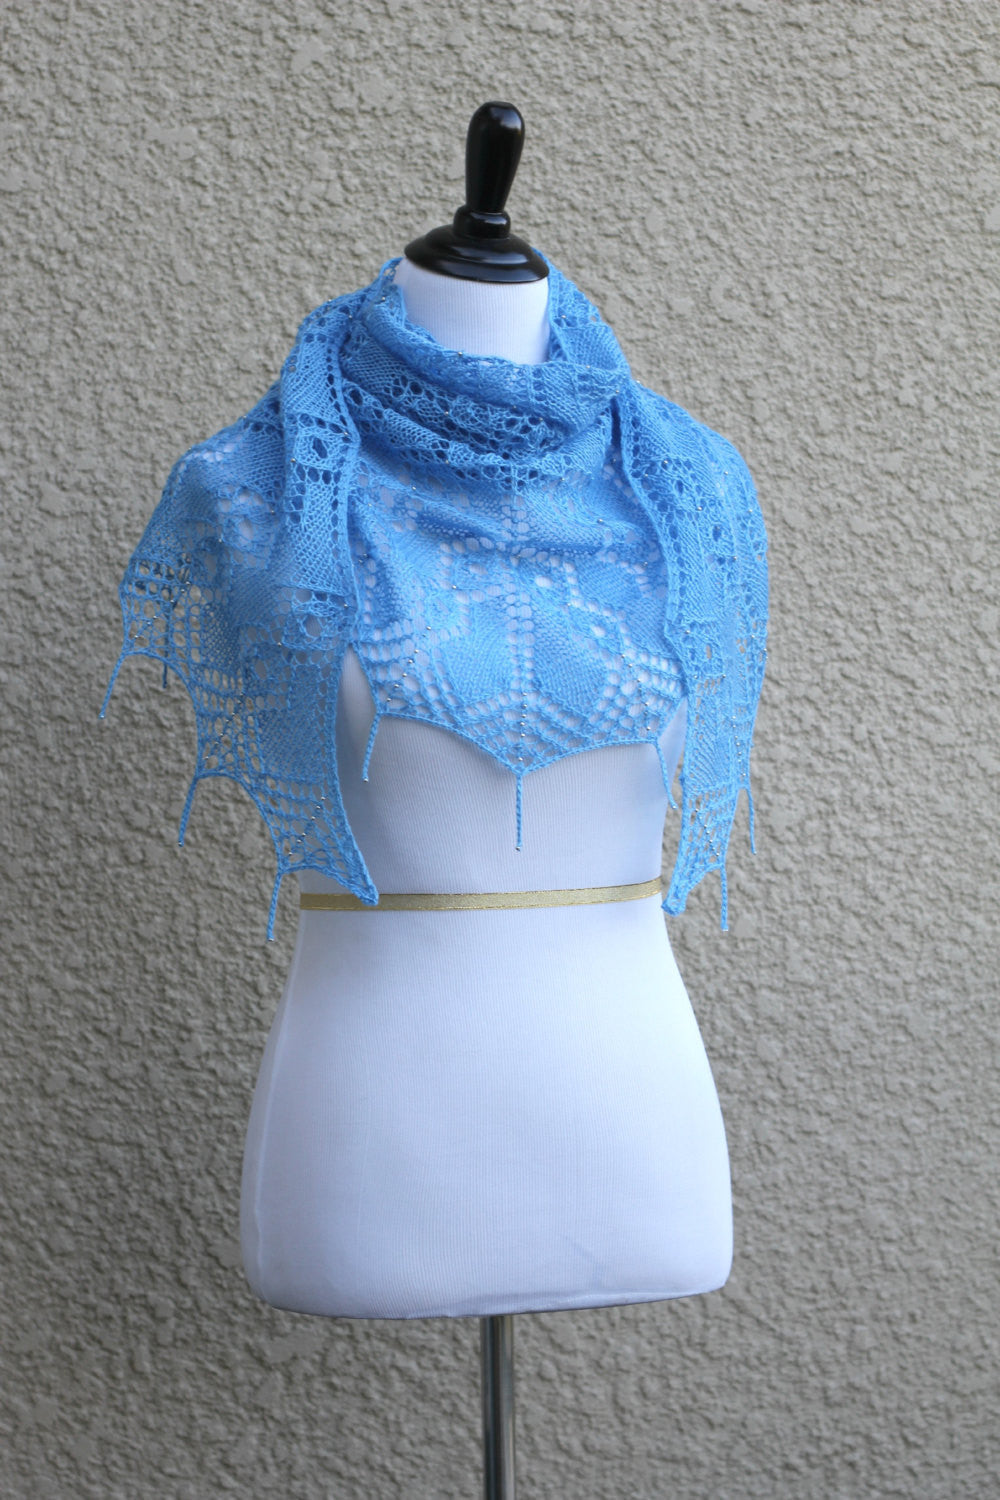 Knit shawl with beads in blue color, laced shawl, gift for her